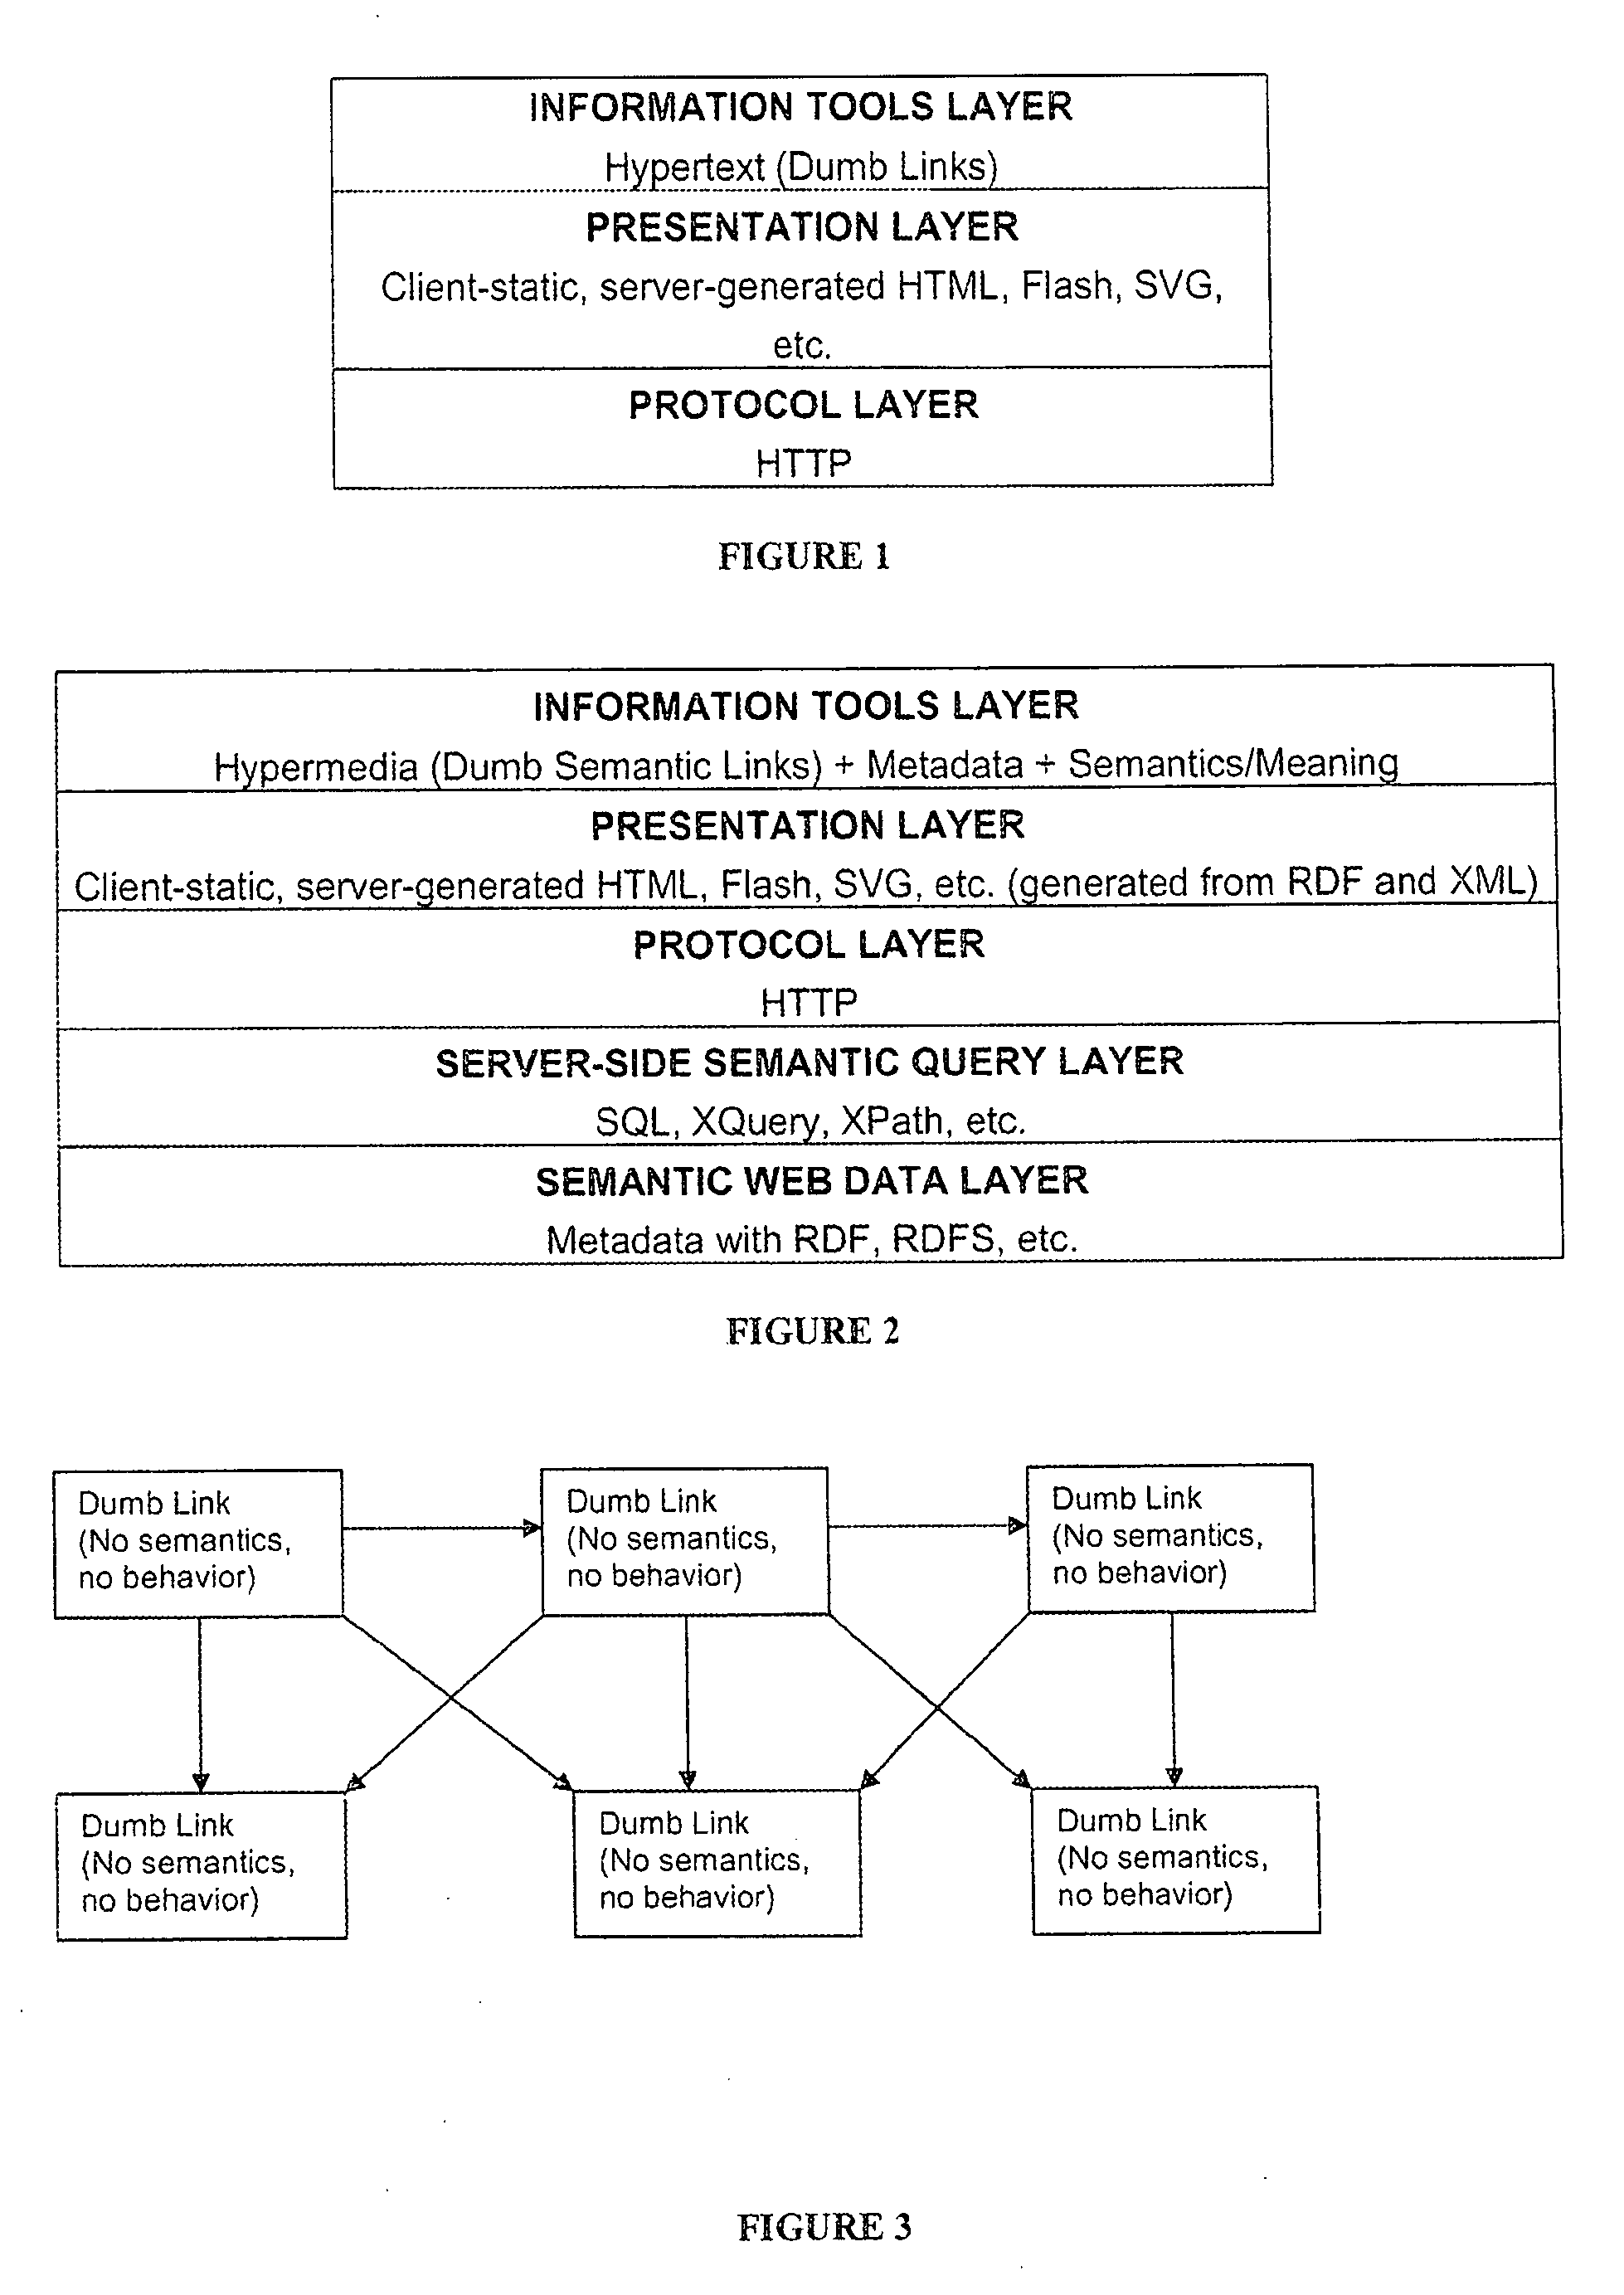 System and method for knowledge retrieval, management, delivery and presentation